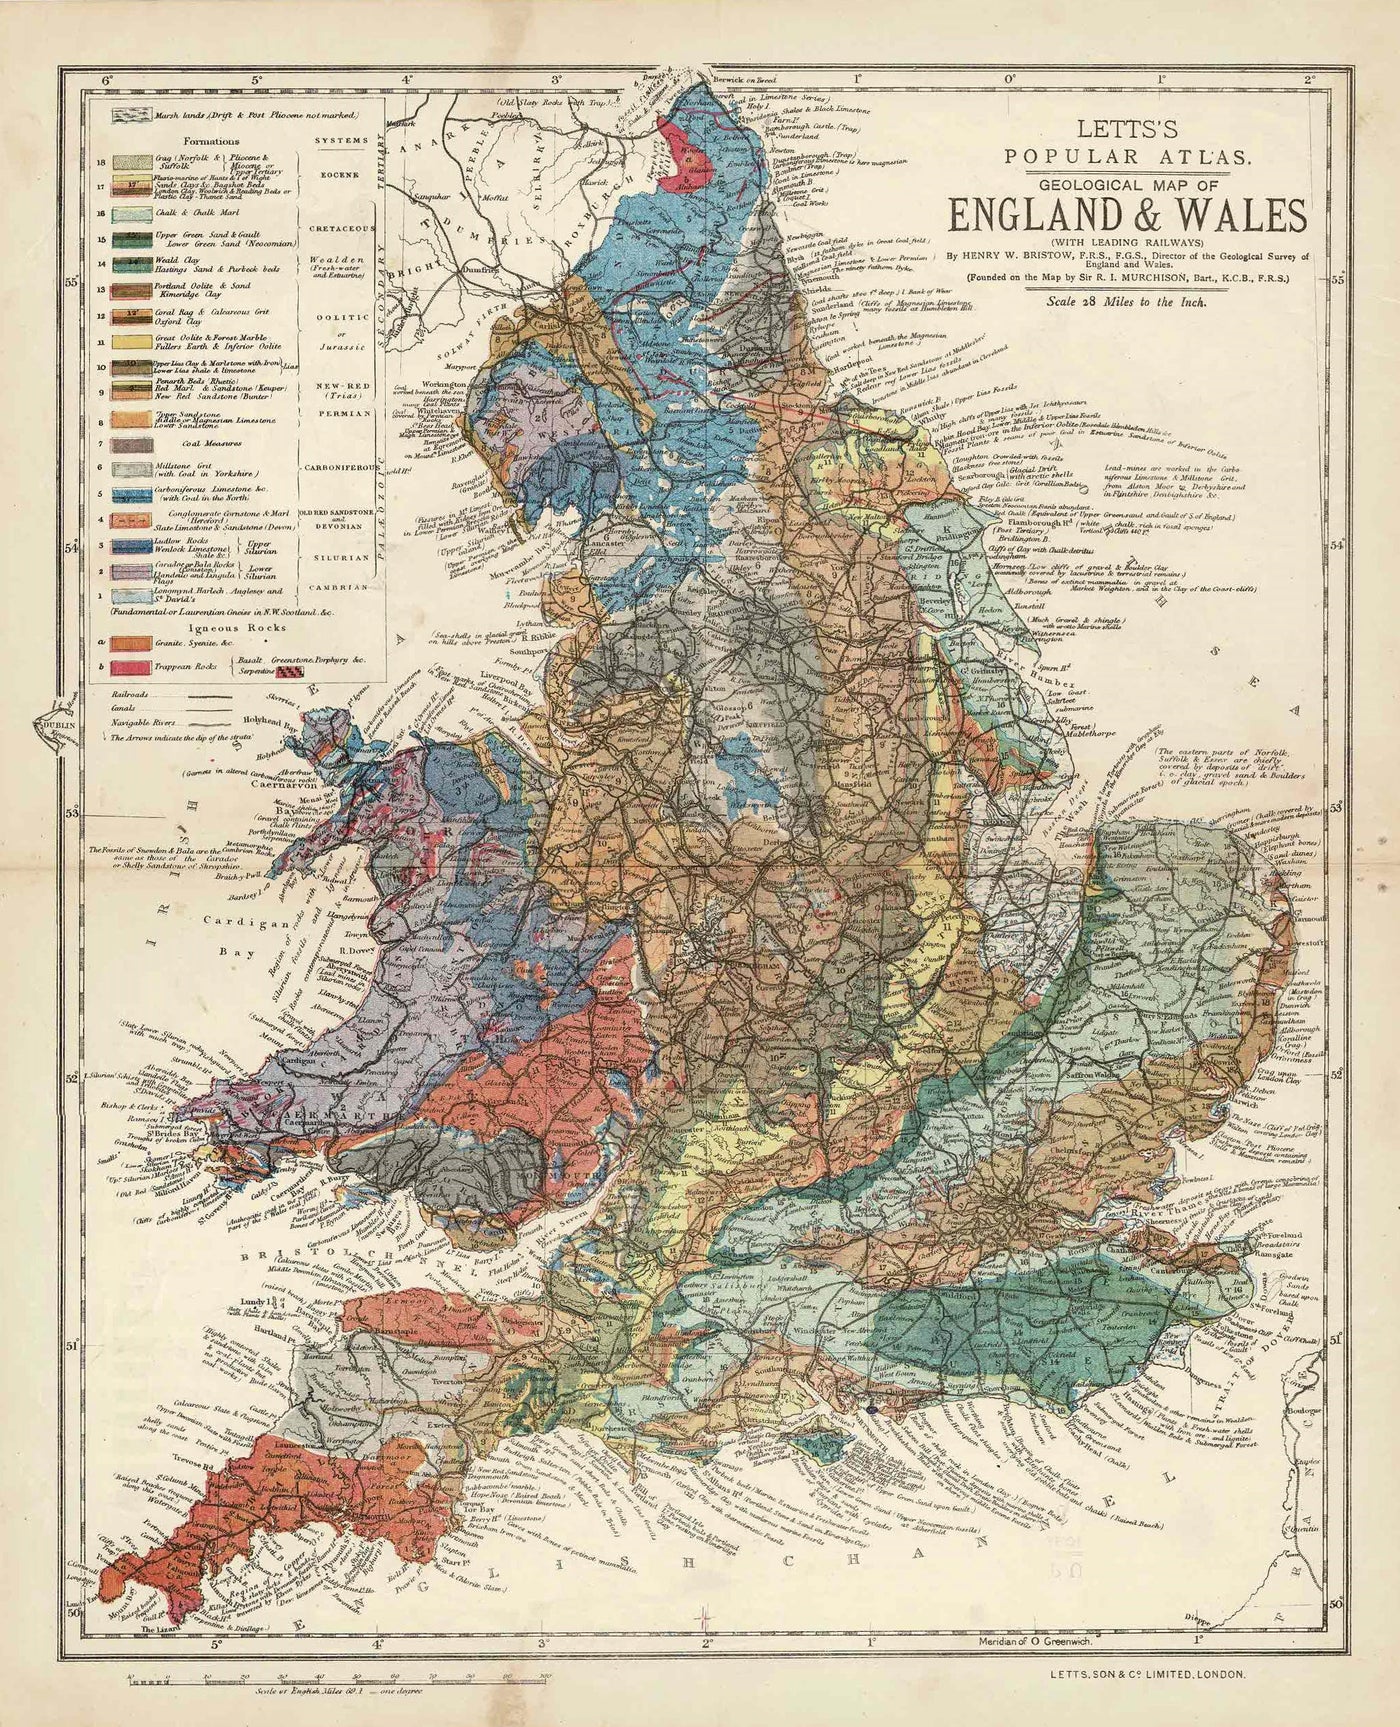 Geological map of England and Wales Letts's "Atlas ..." 1881